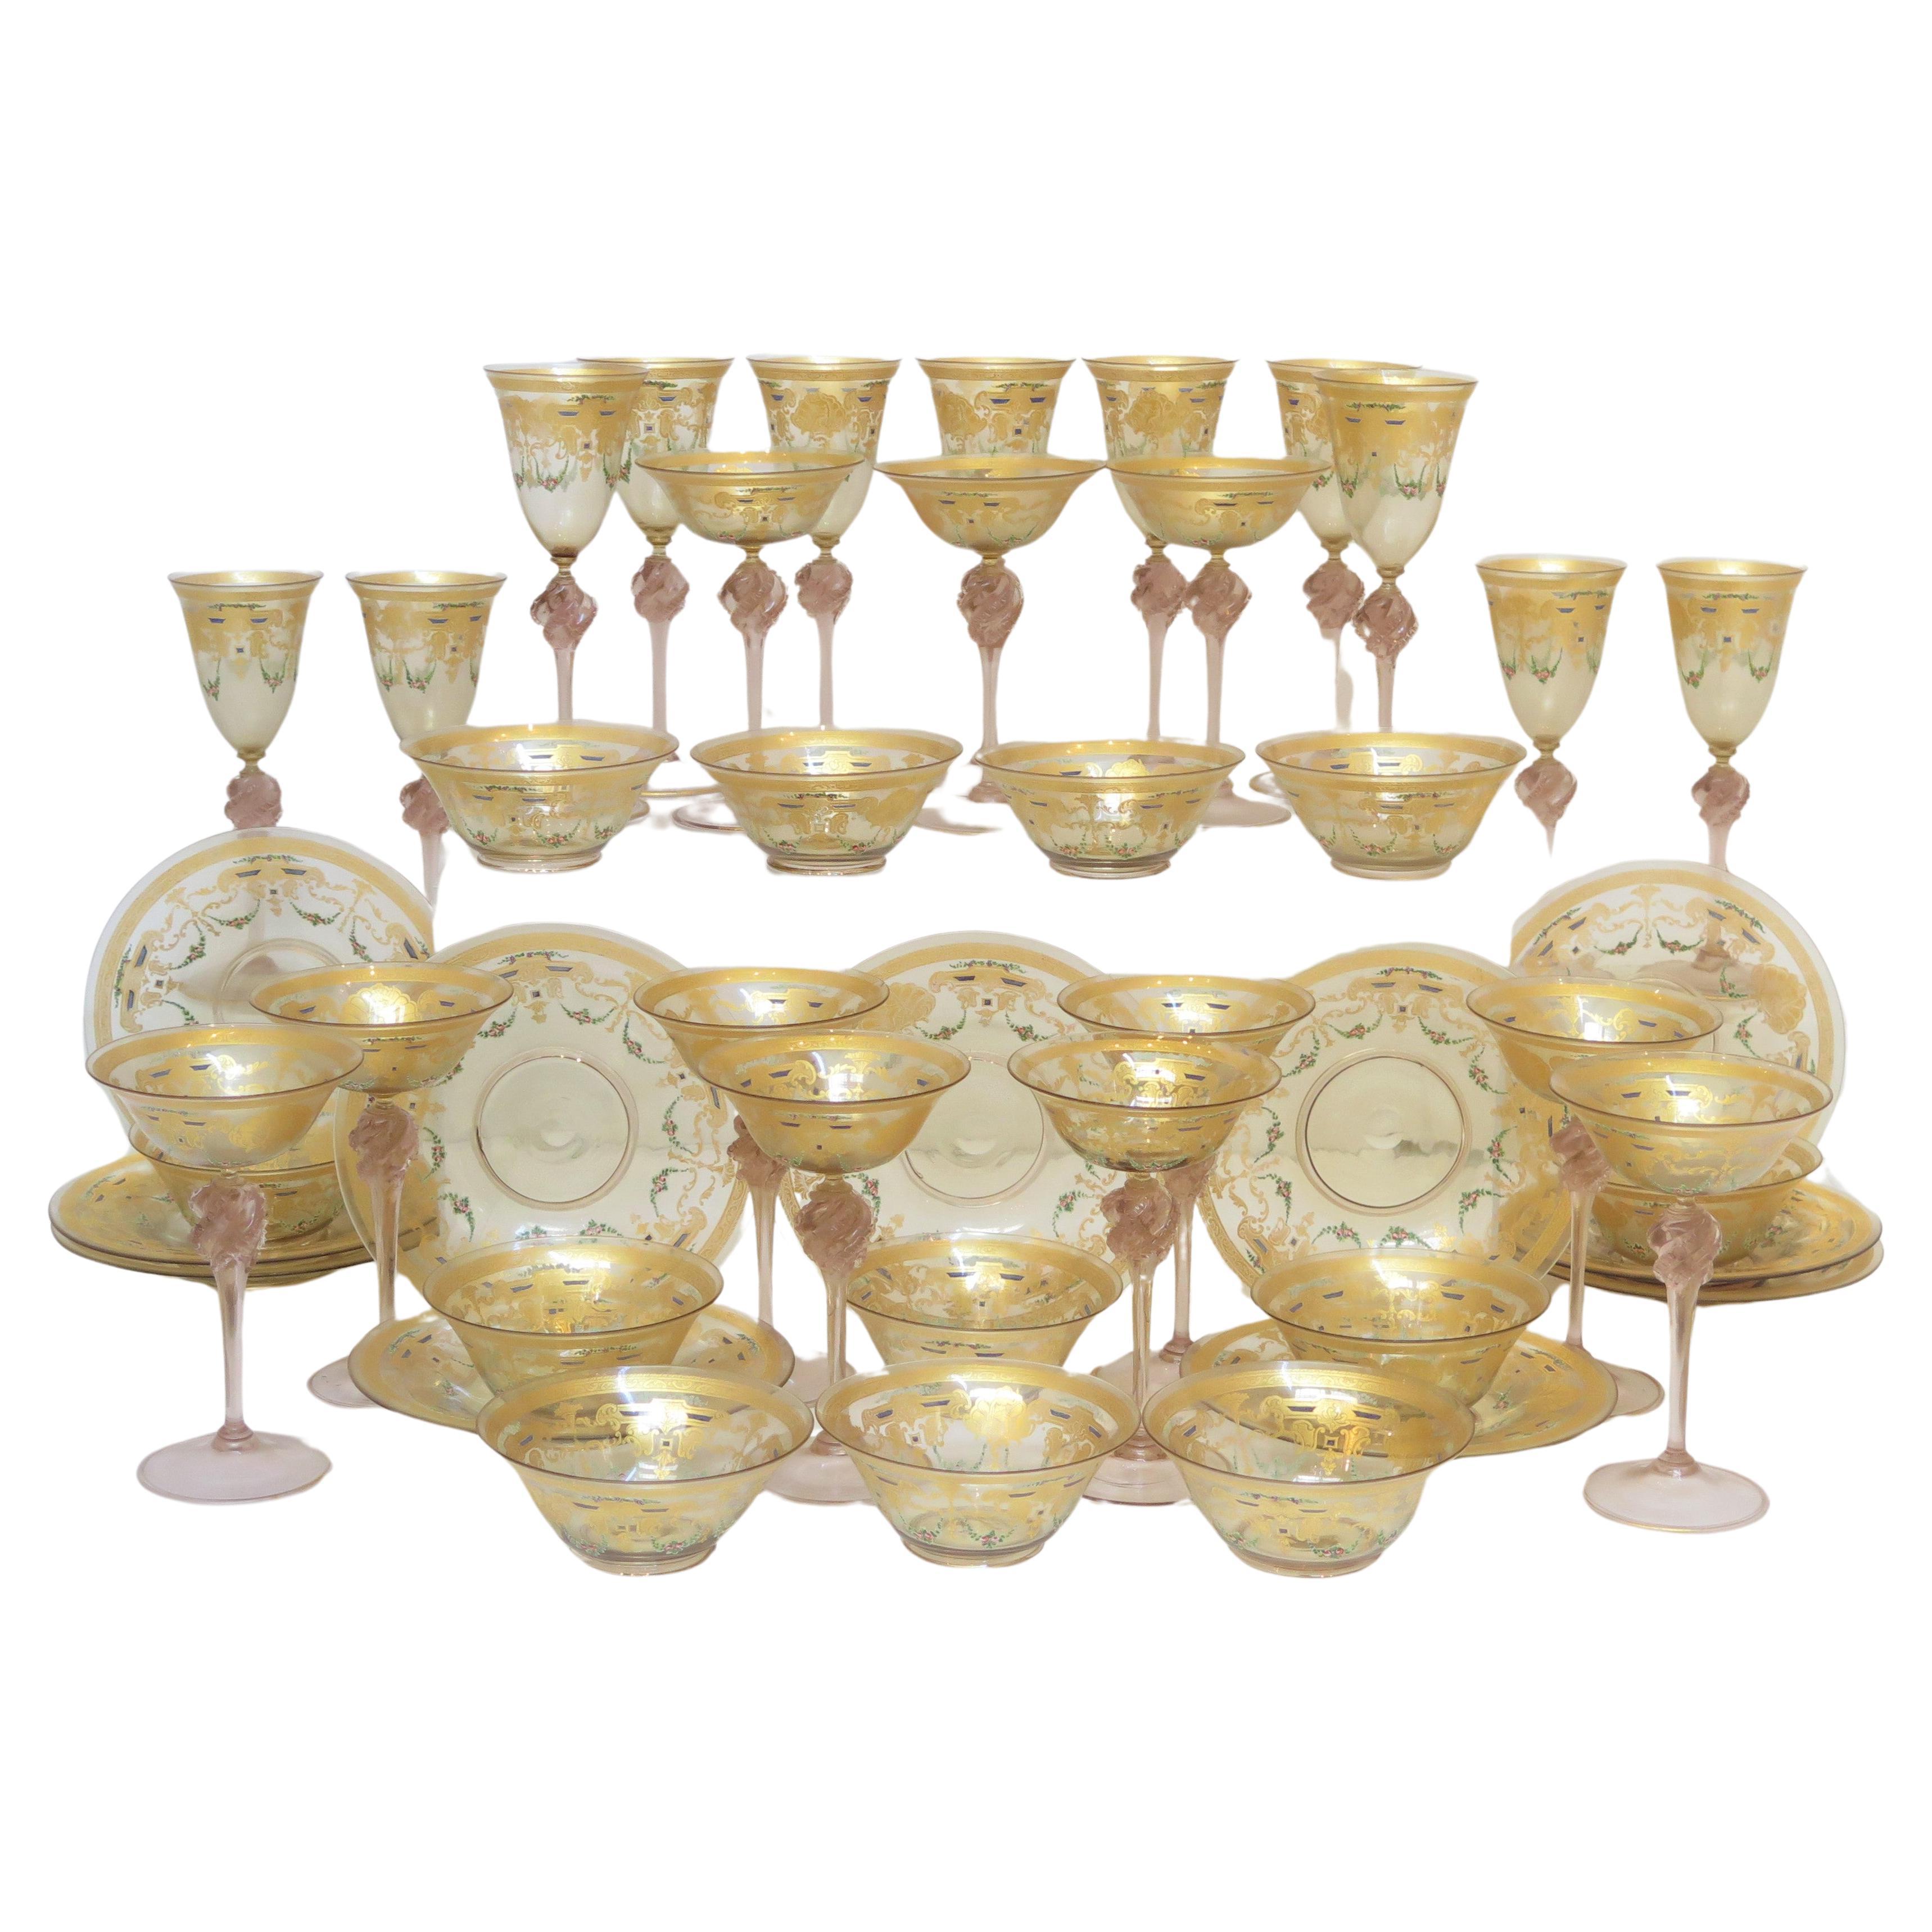 45 Group of Venetian Murano Glass Stemware with Gilt and Hand-Painted Decoration For Sale